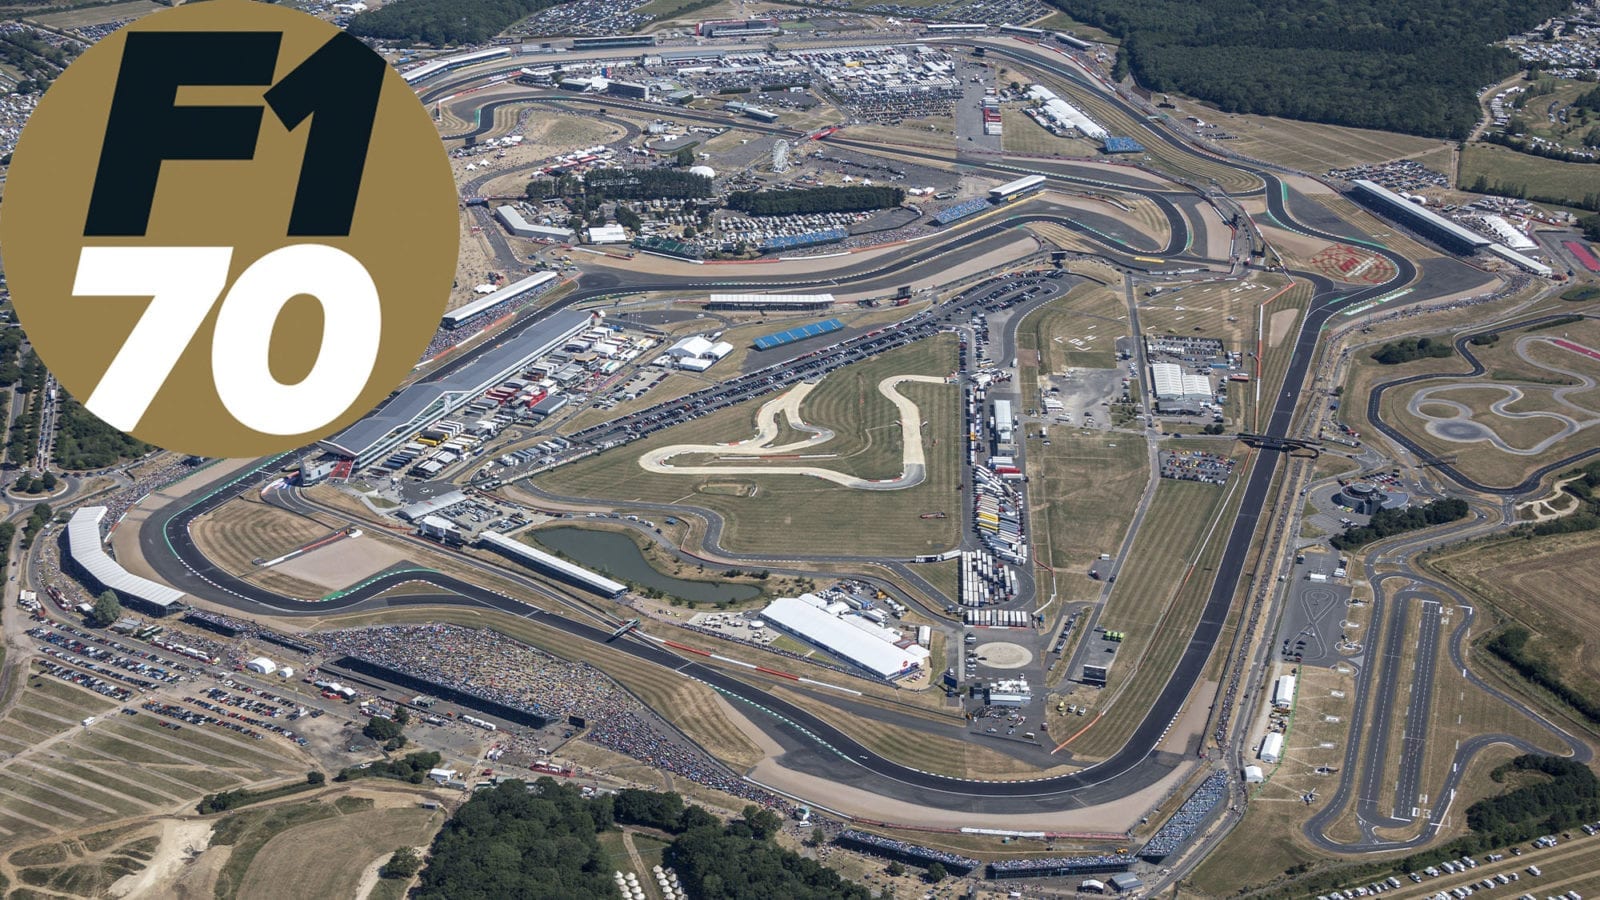 Overhead view of Silverstone during the 2018 British Grand Prix